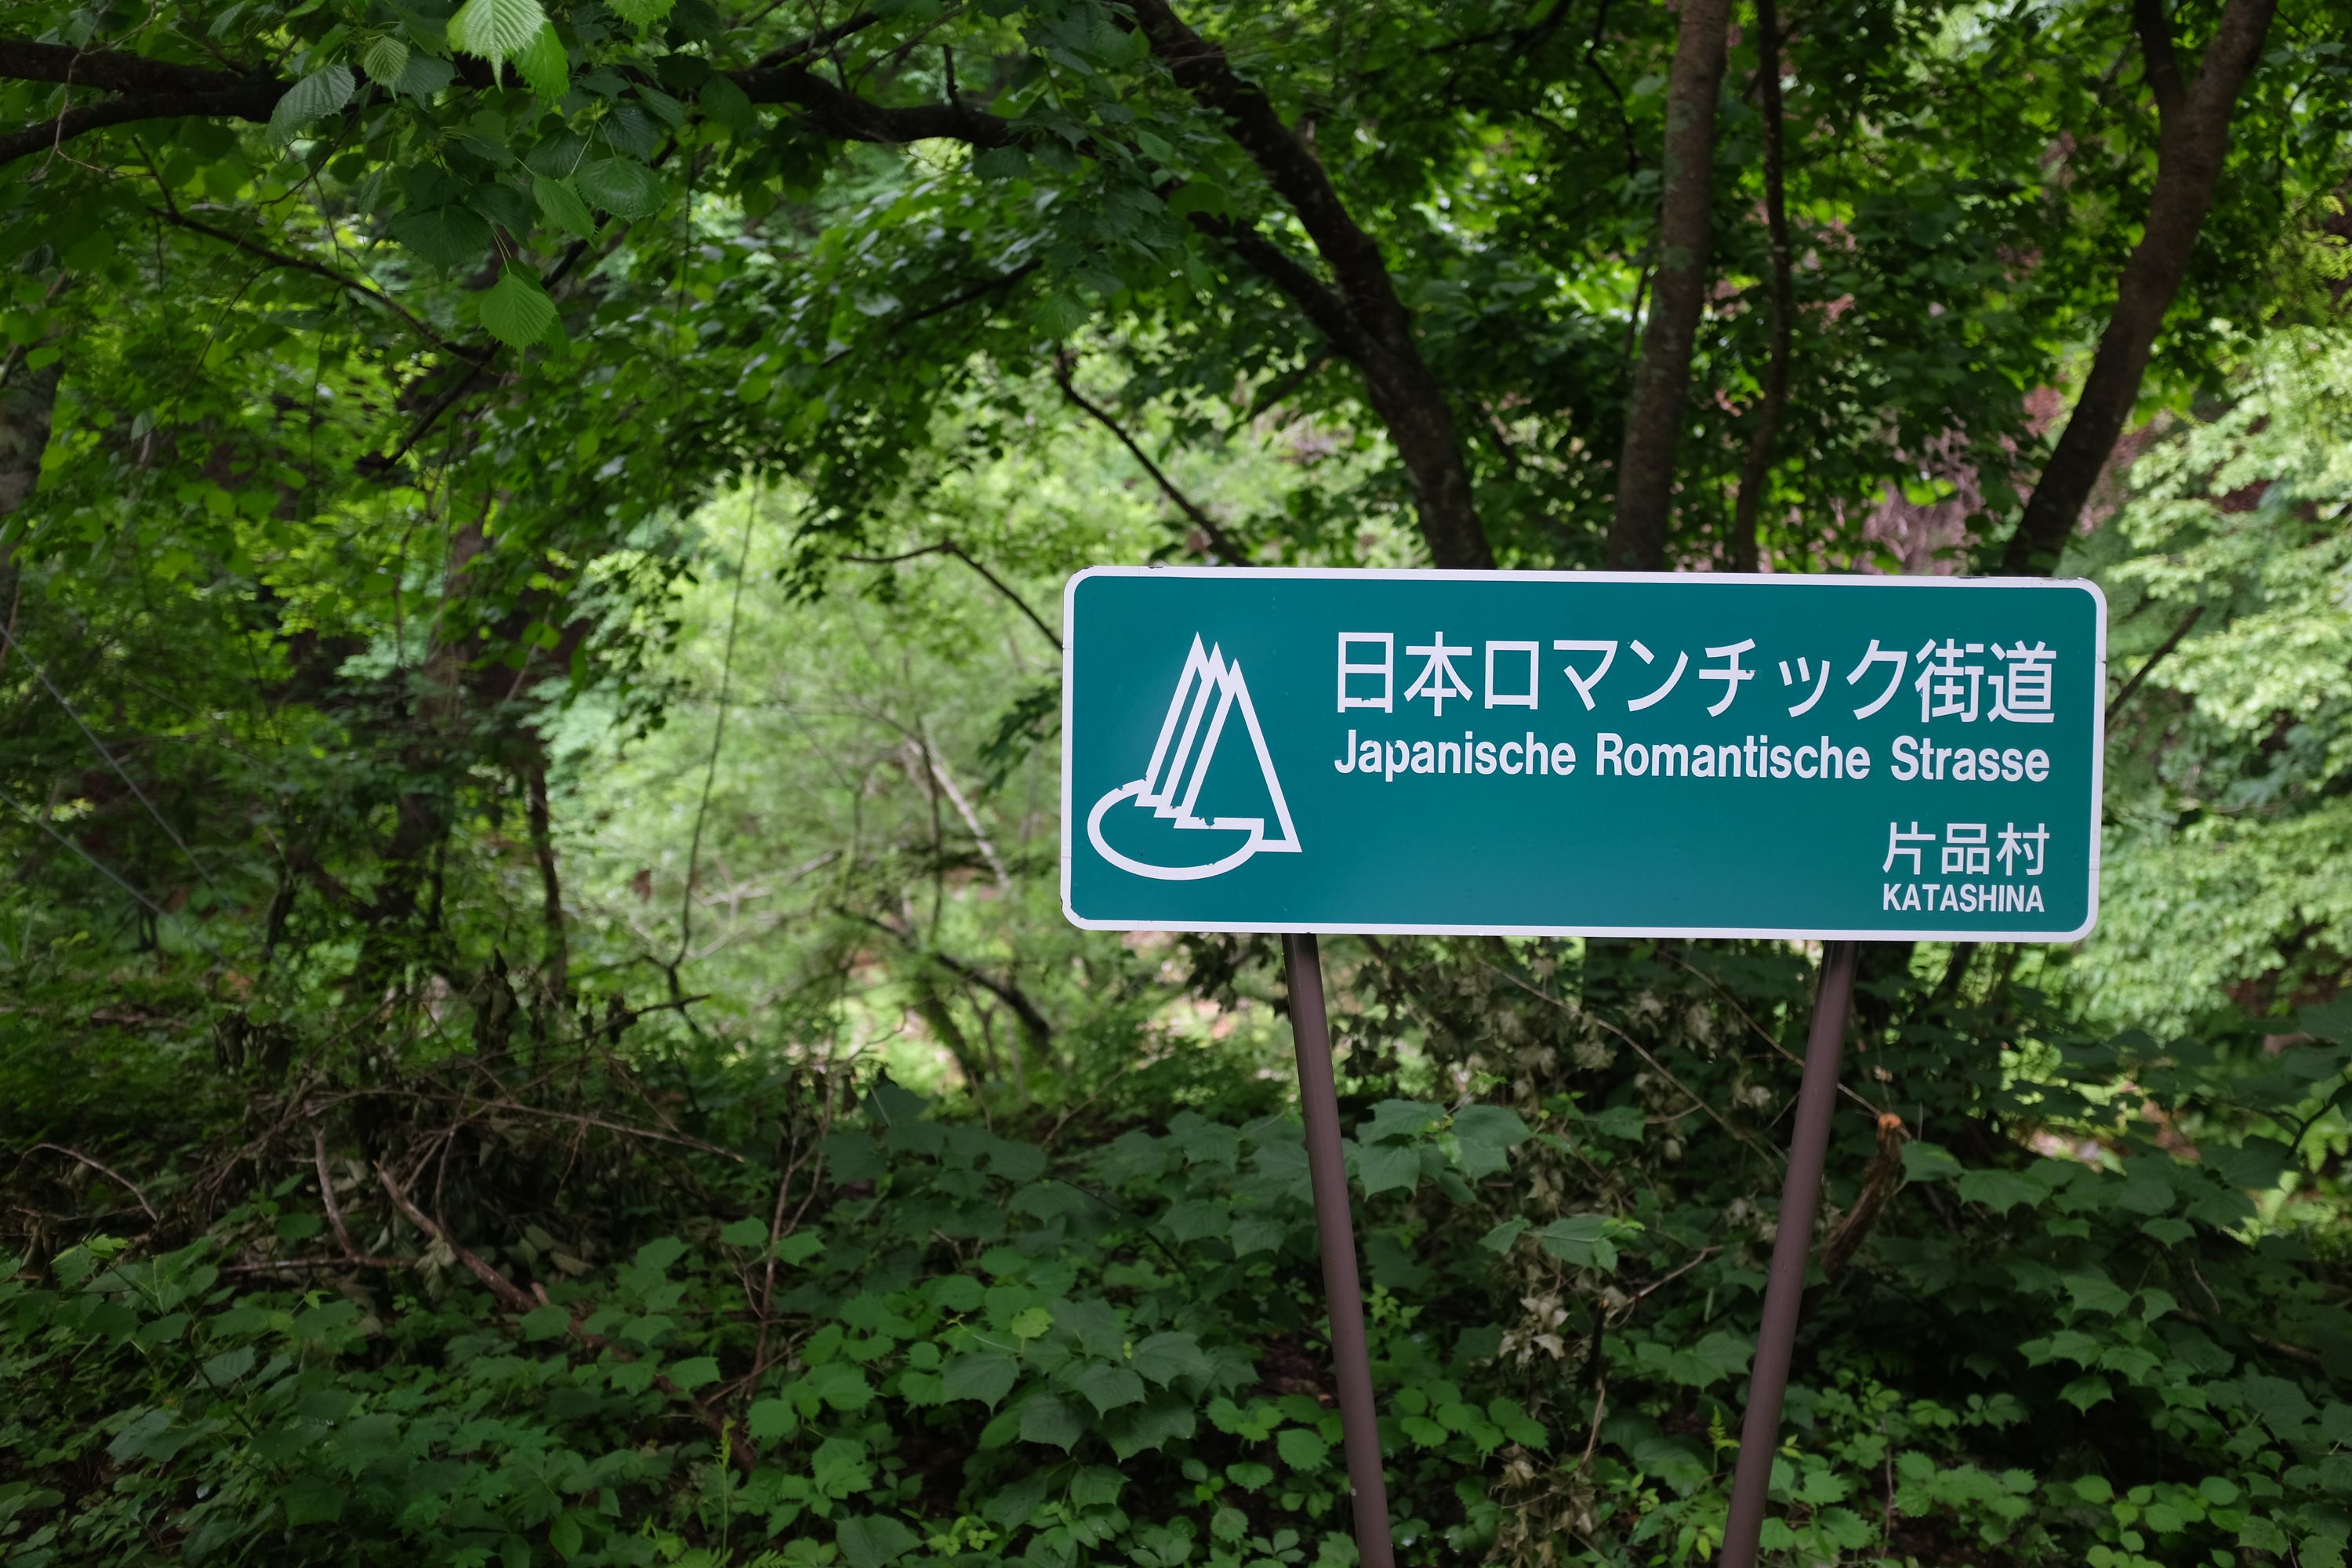 A road sign in a forest saying Japanische Romantische Strasse.